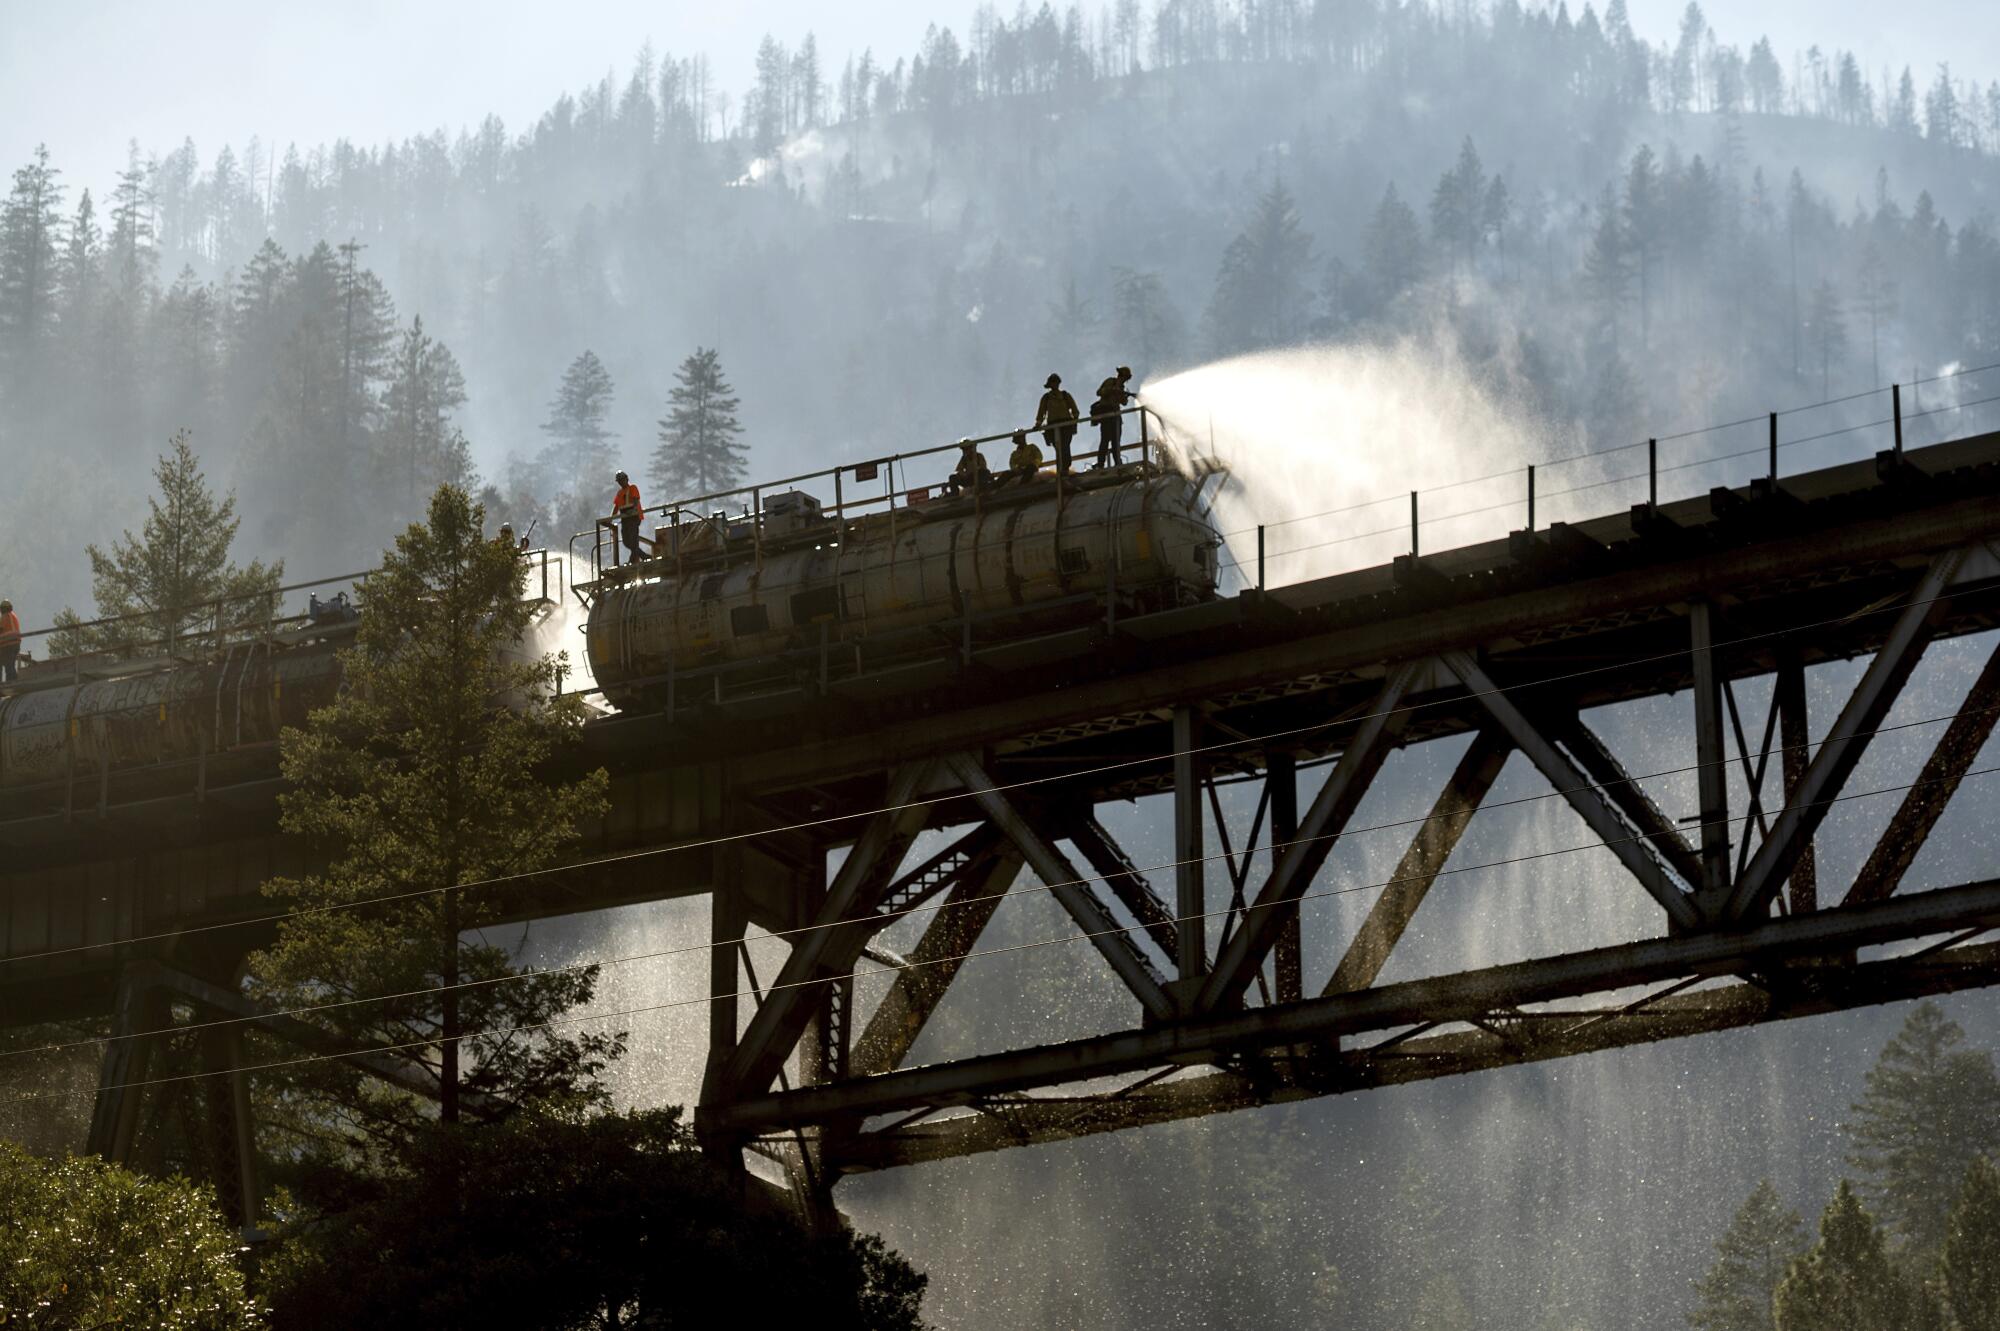 Firefighters spray water from Union Pacific Railroad's fire train while battling the Dixie Fire in Plumas National Forest.